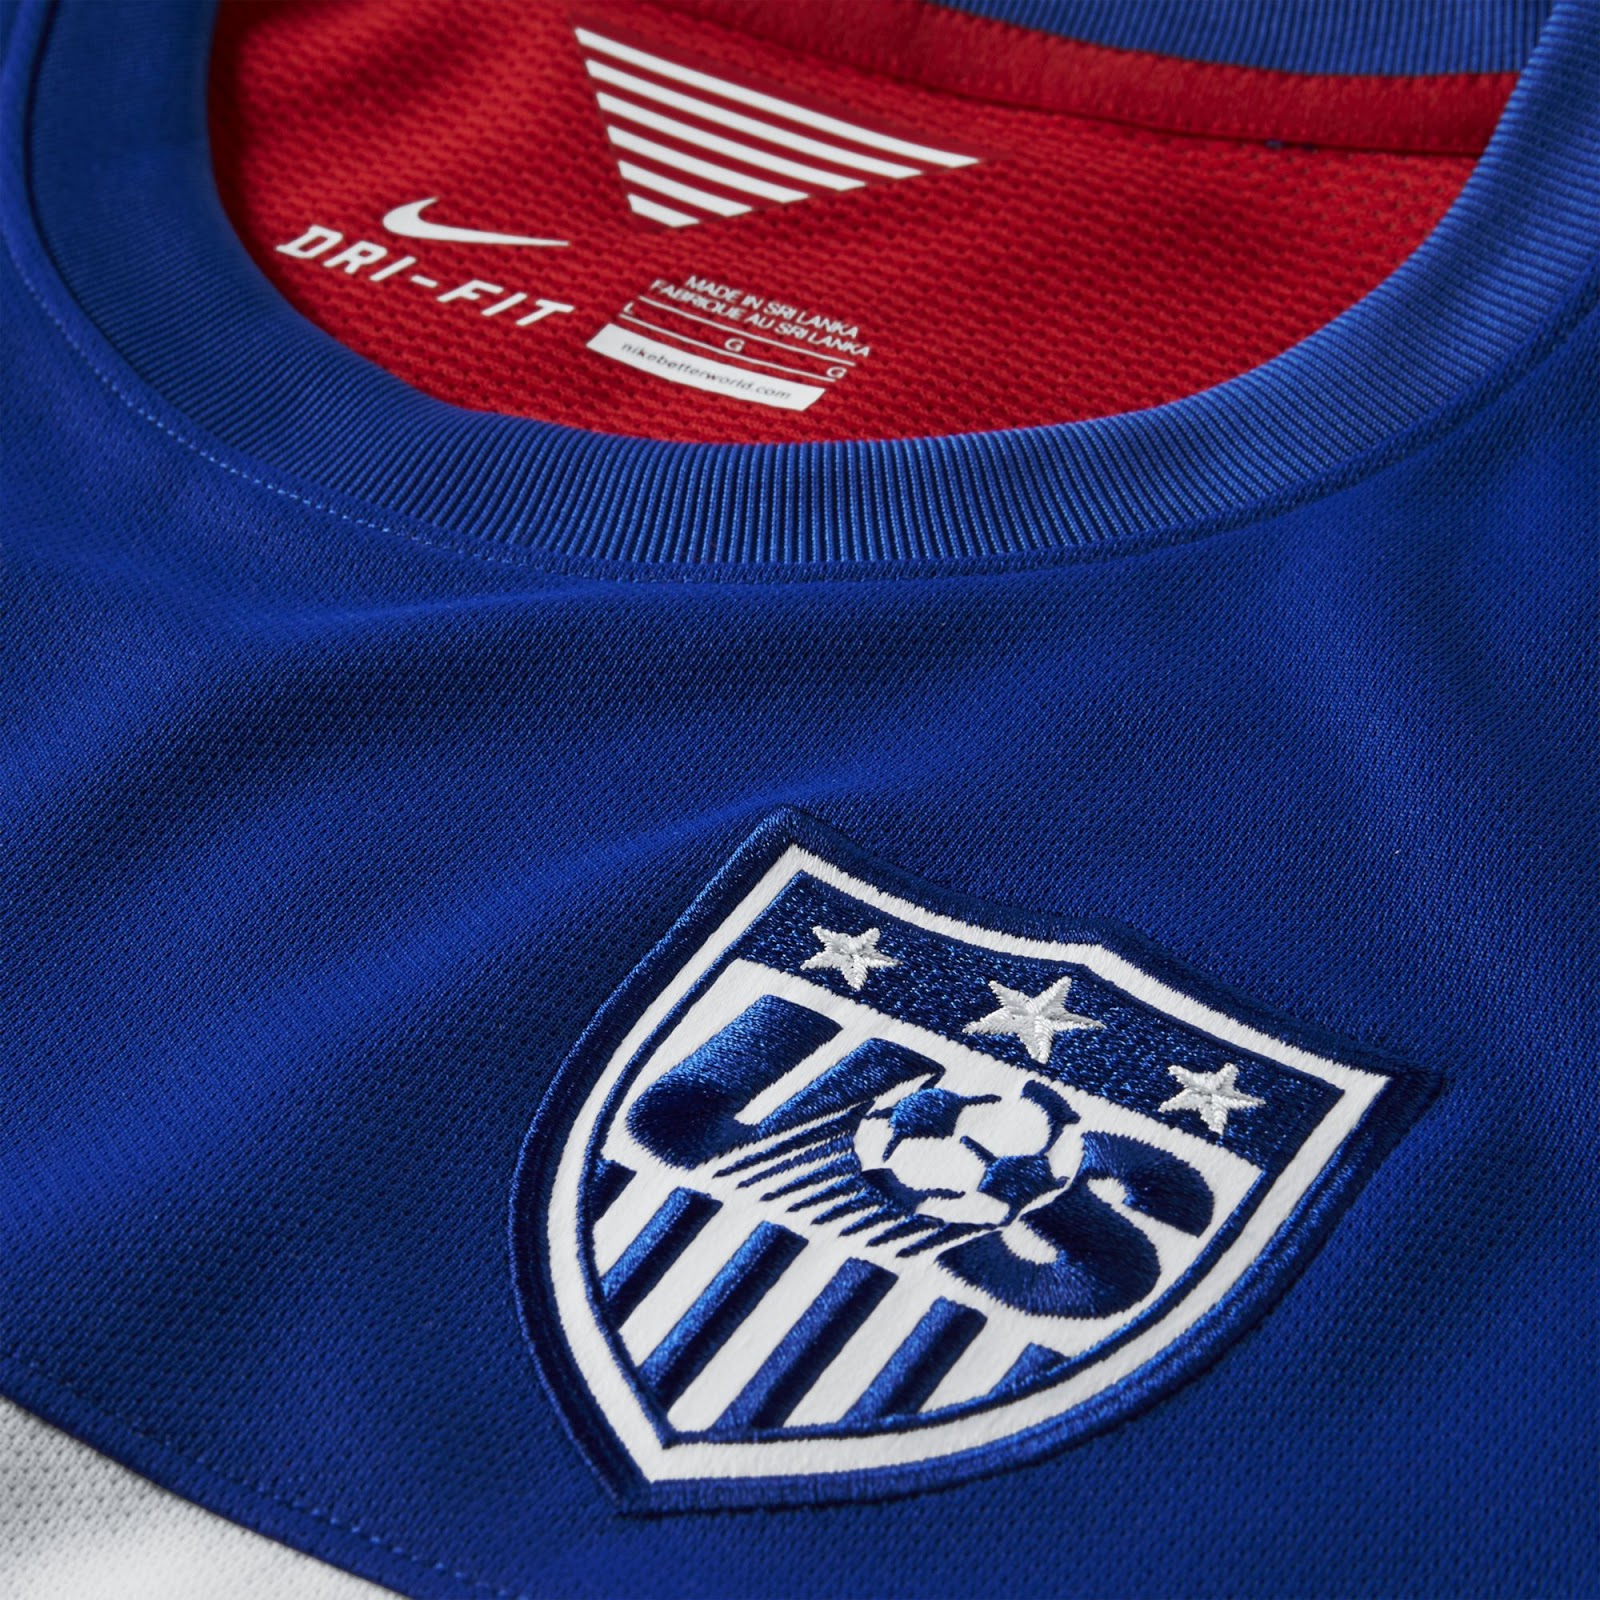 USA 2014 World Cup Home and Away Kits Released Footy